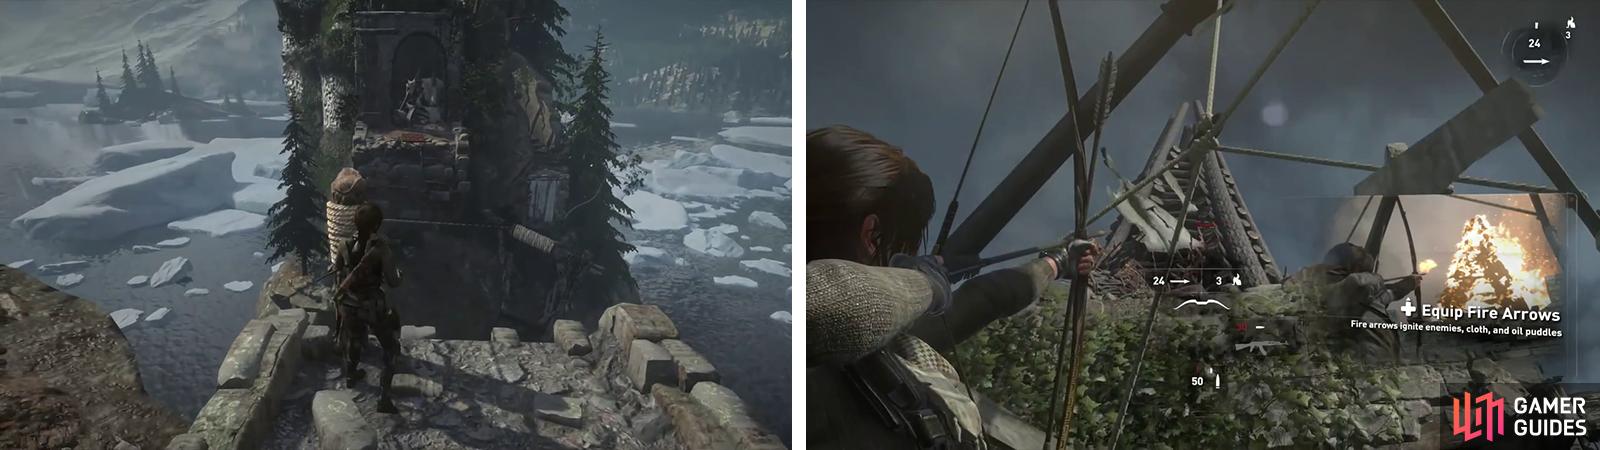 Use a Rope Arrow to reach the island (left). Climb to the top and hit the pyre with a Fire Arrow (right).